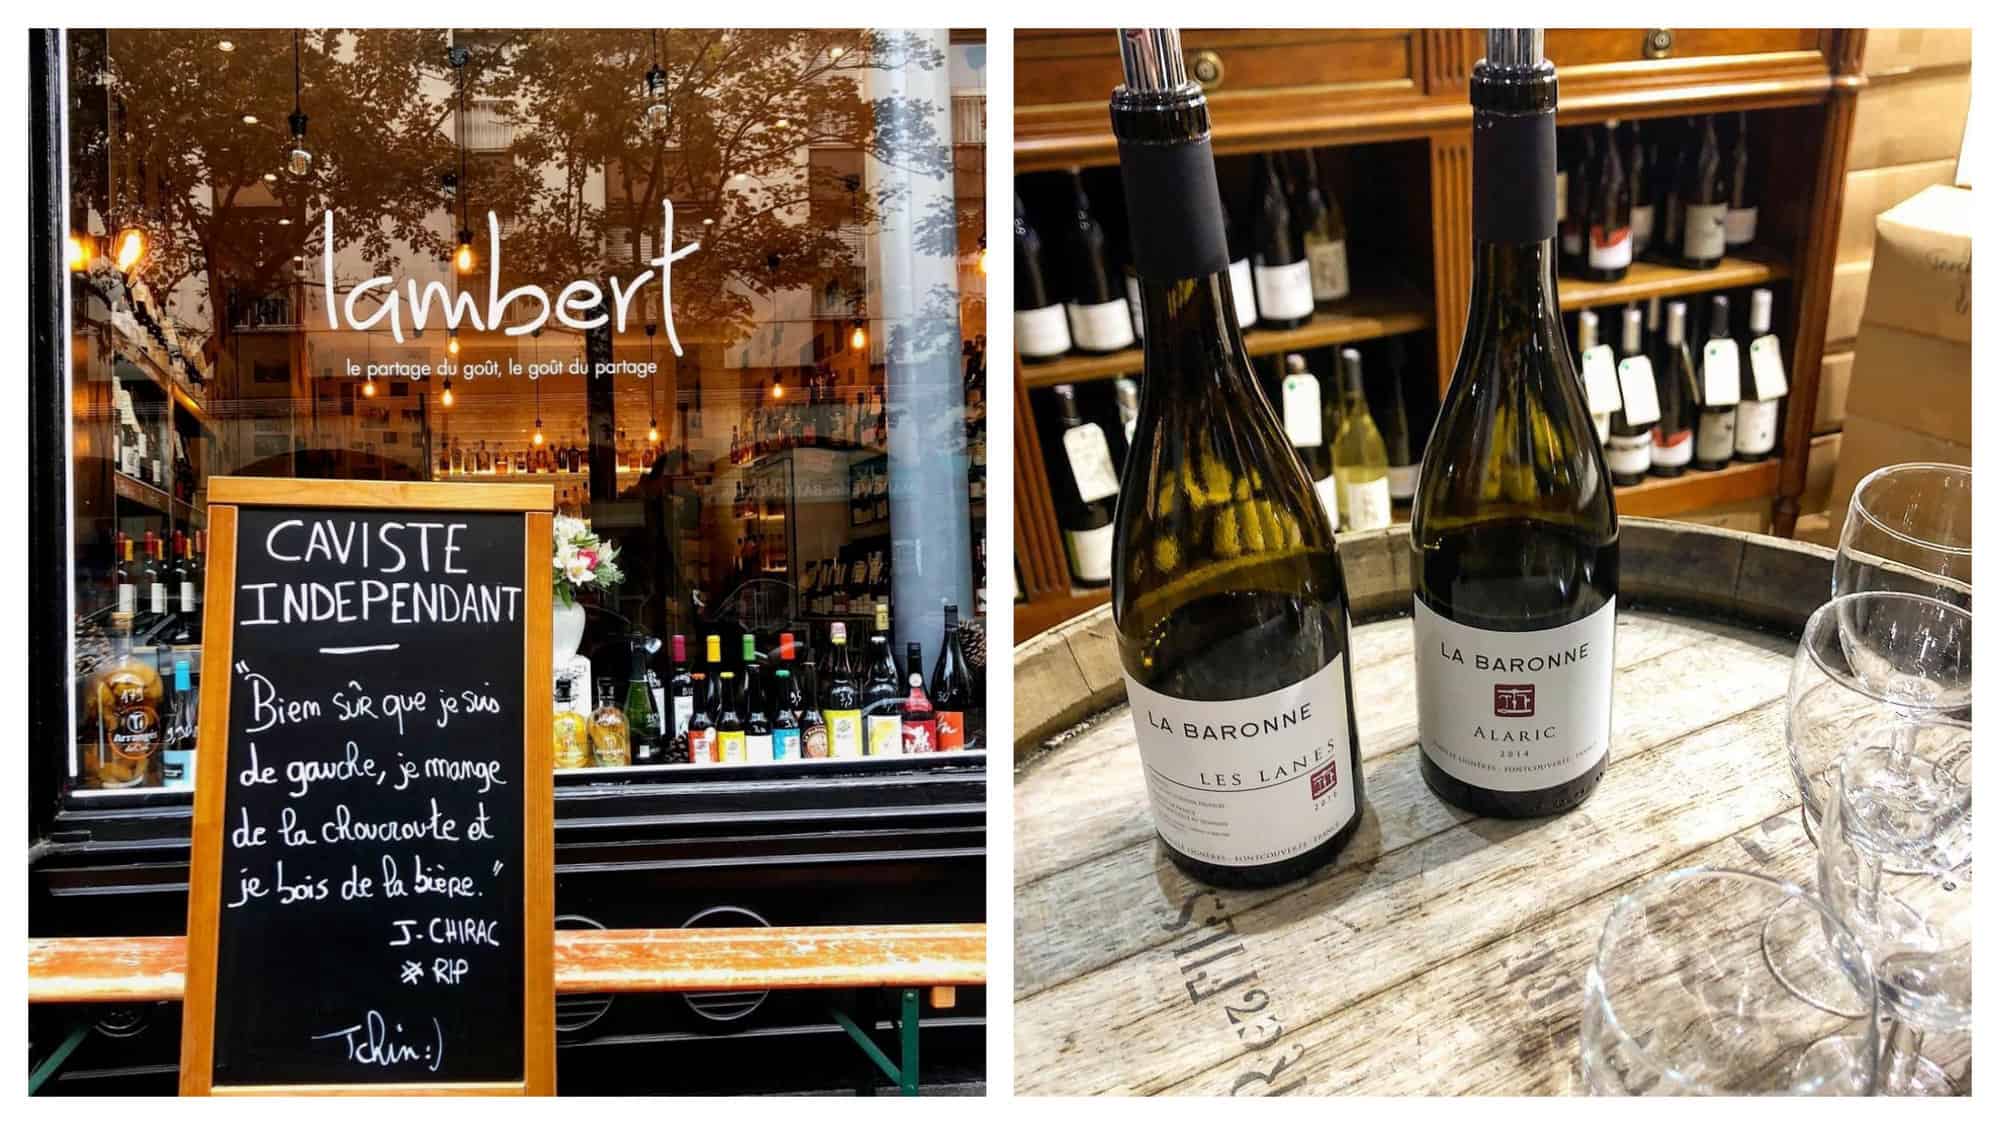 Left: the exterior of La Cave Lambert 18e. The store's name is written in white on the window and there are several bottles of wine visible. There is a chalkboard sign outside with a quote written in French. Right: two bottles of wine with several empty wine glasses on top of an old wine barrel inside La Cave Lambert shop.